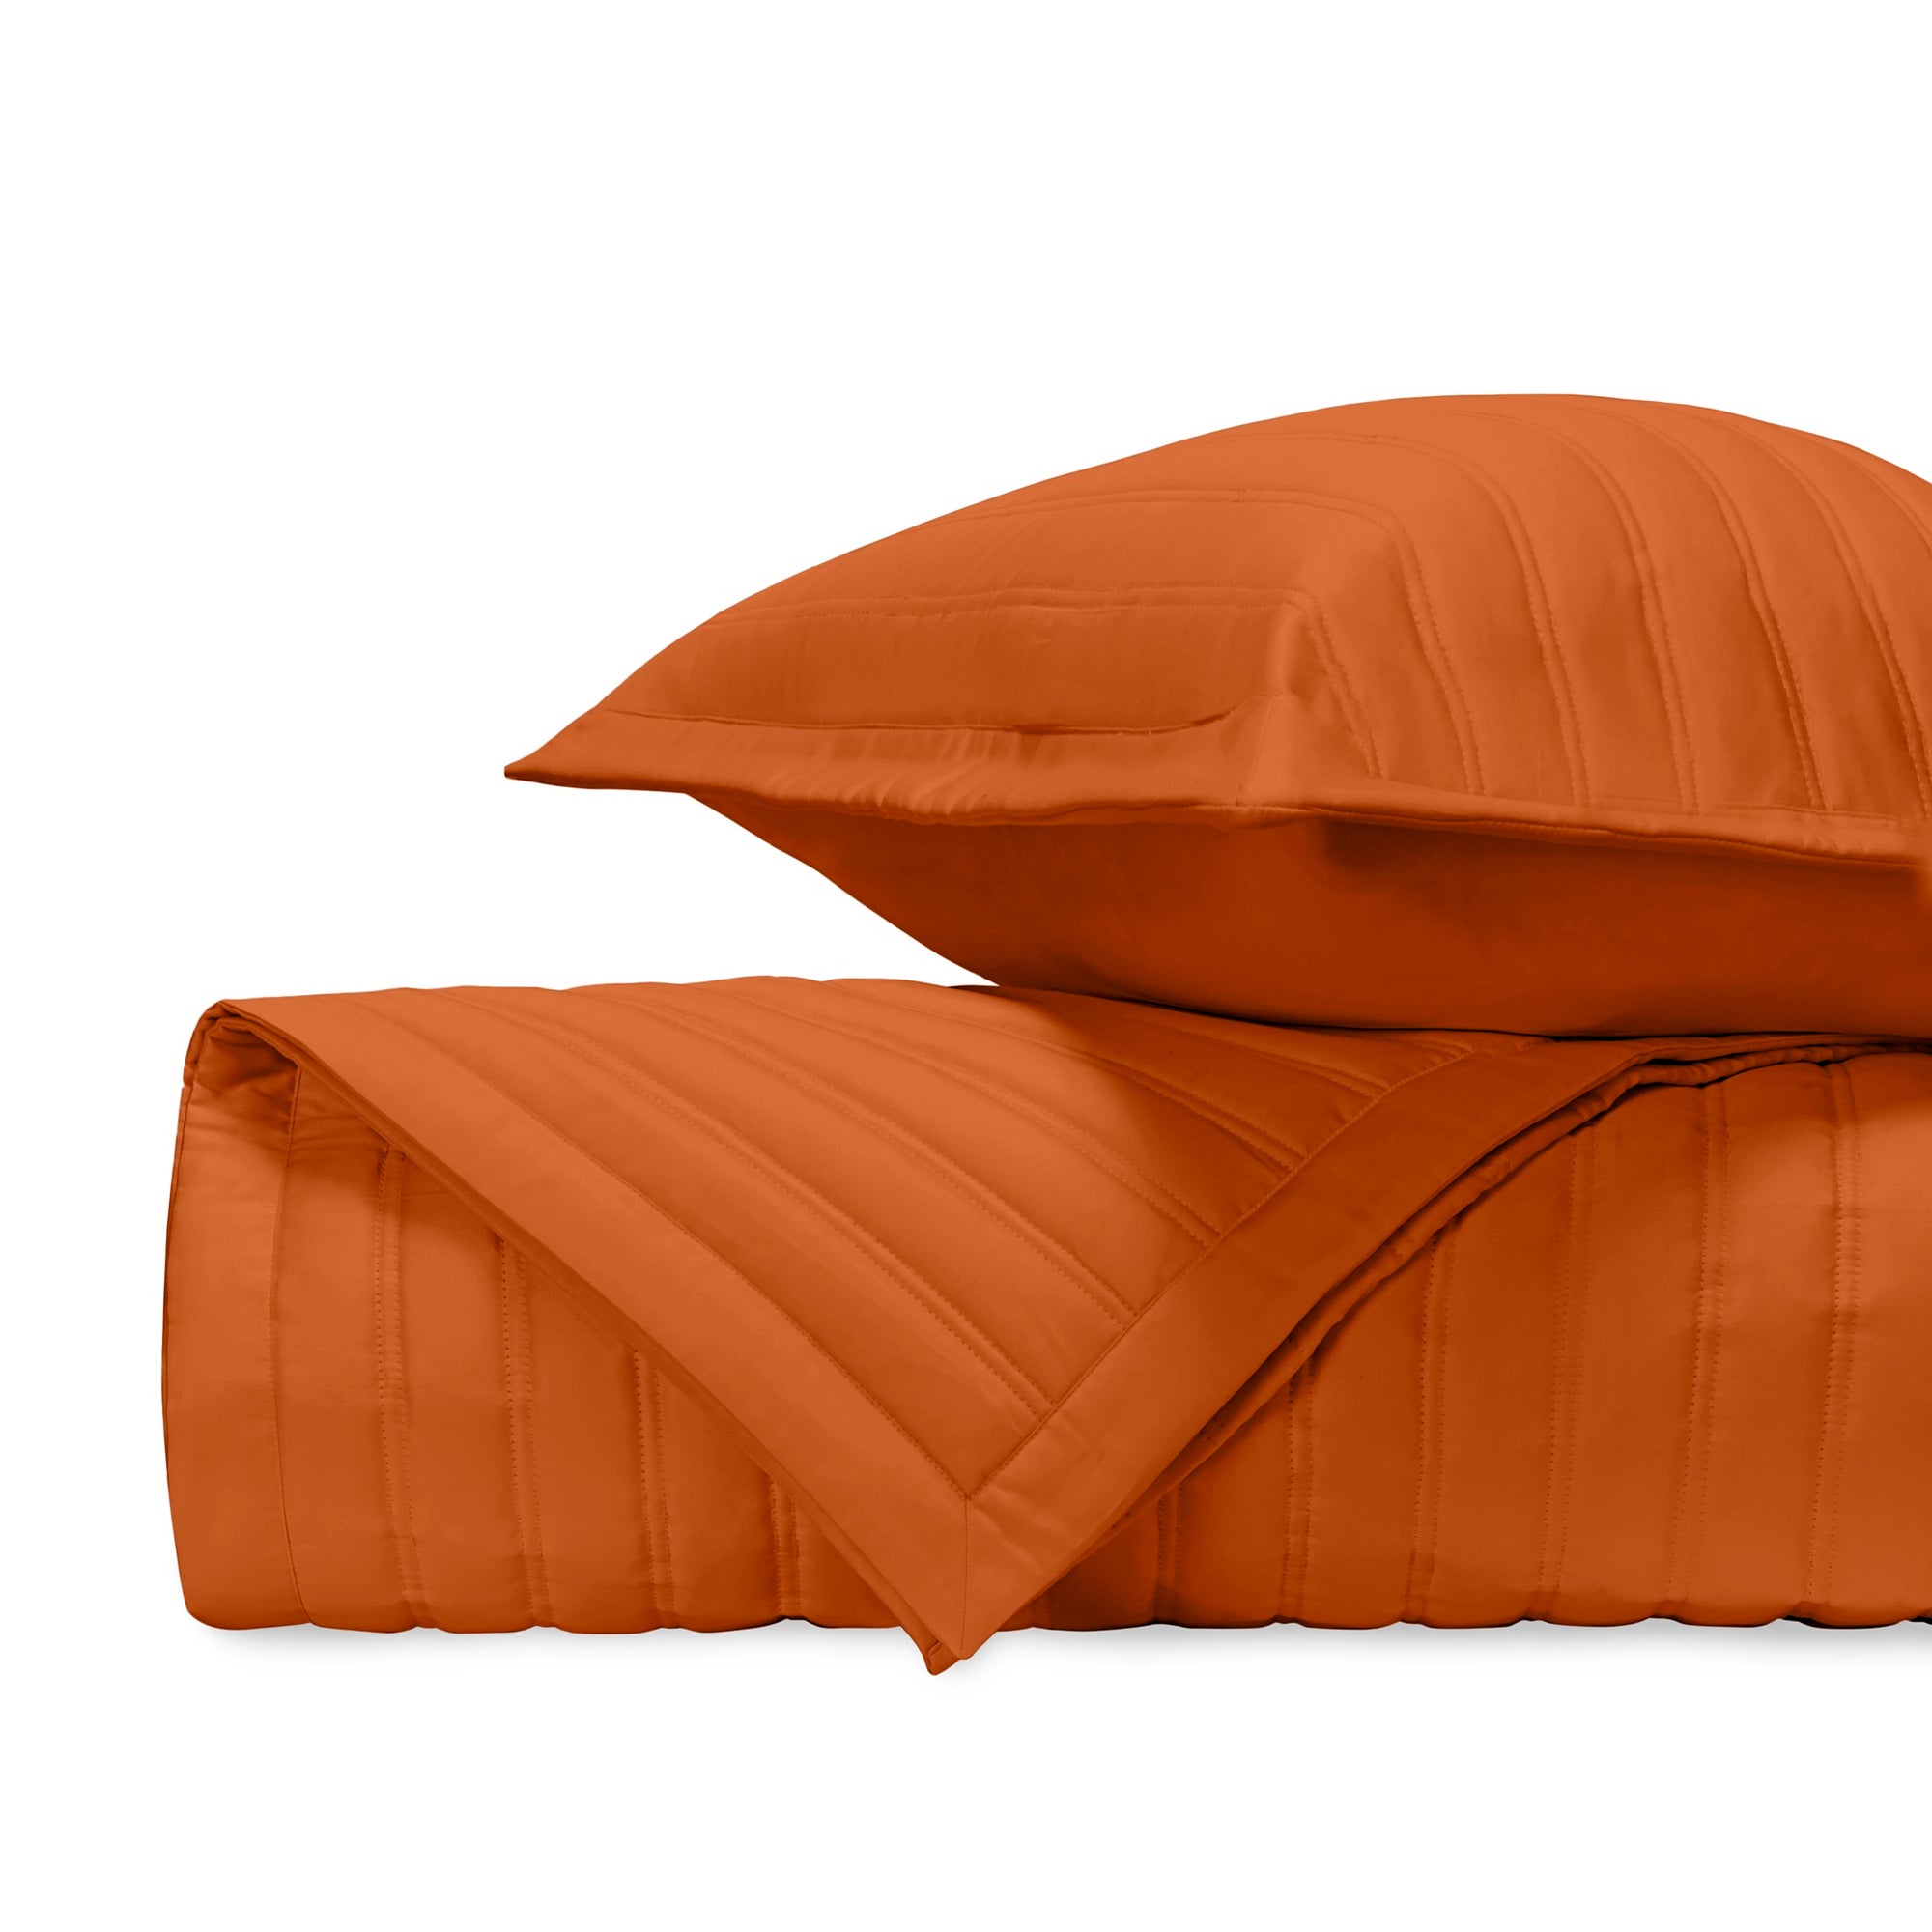 Stack Image of Home Treasures L'Avenue Royal Sateen Quilted Bedding in Color Clementine